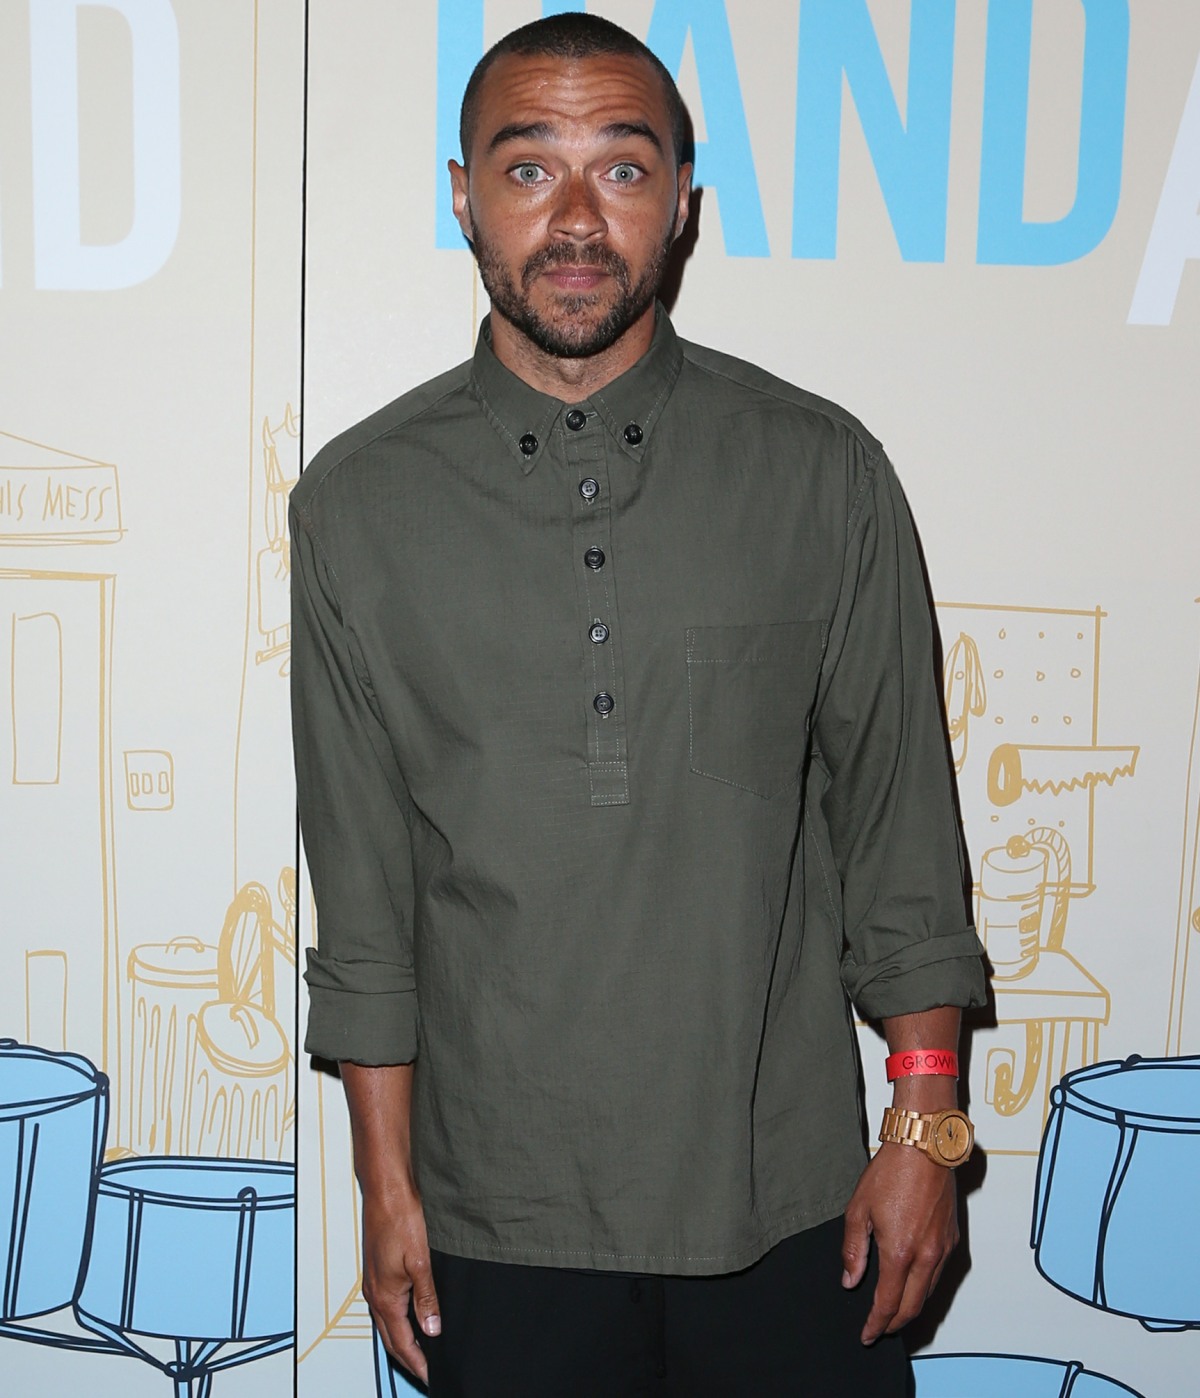 Premiere Of IFC Films' 'Band Aid' - Arrivals